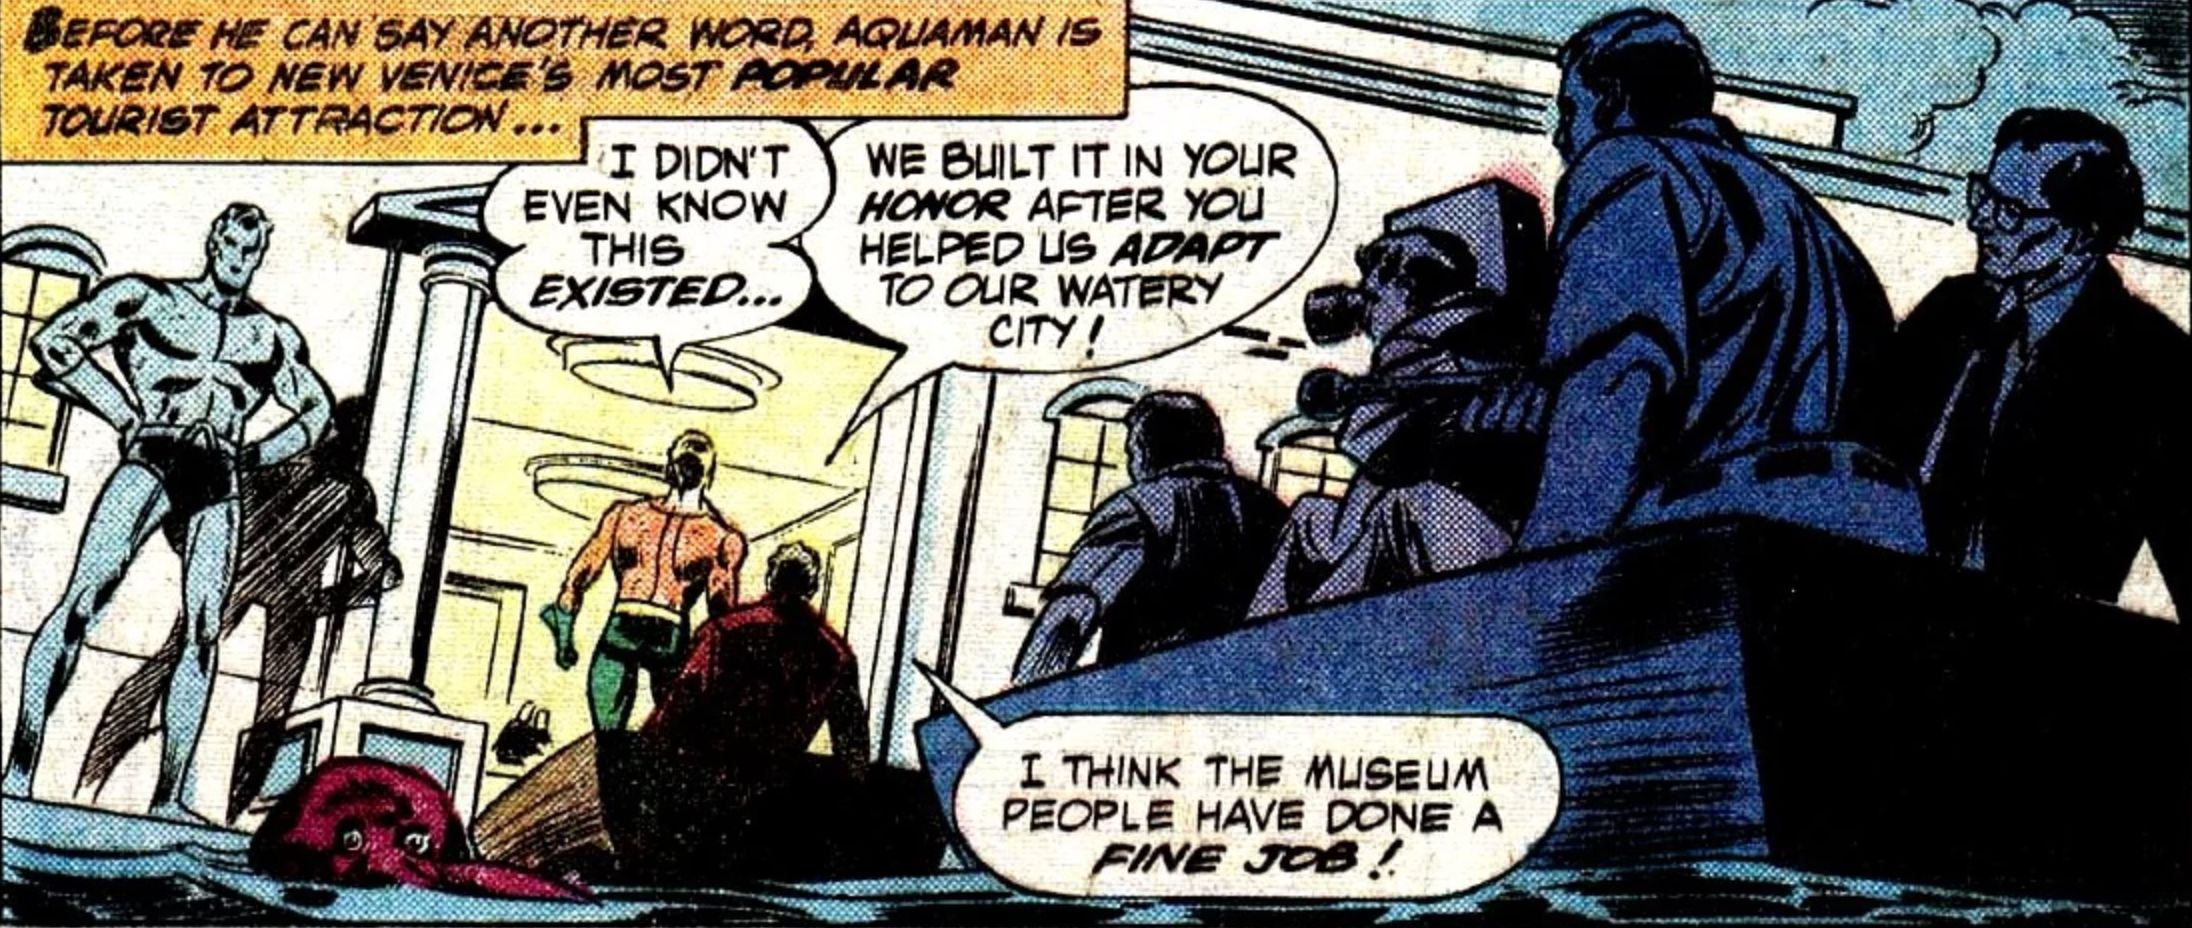 Aquaman Sees The Museum Dedicated to Him at New Venice